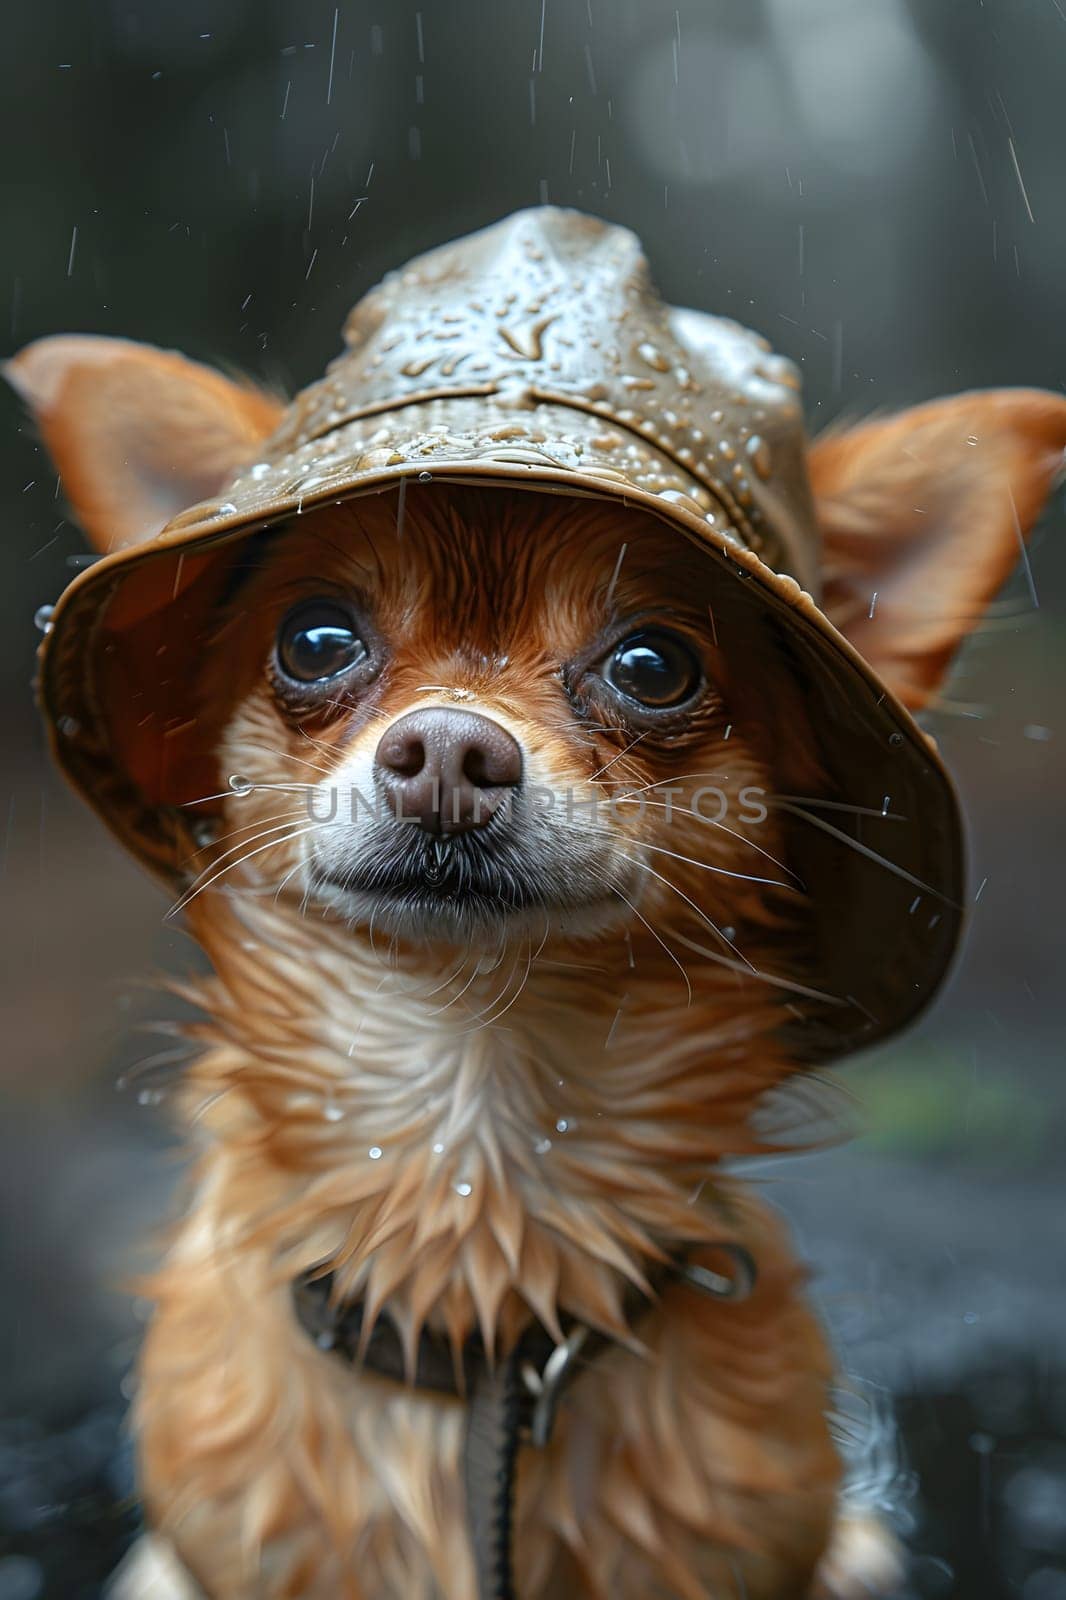 The fawncolored carnivore, a small dog breed, bravely wore a hat in the rain. Its livercolored ears and whiskers got wet as it trotted alongside its companion dog in the downpour